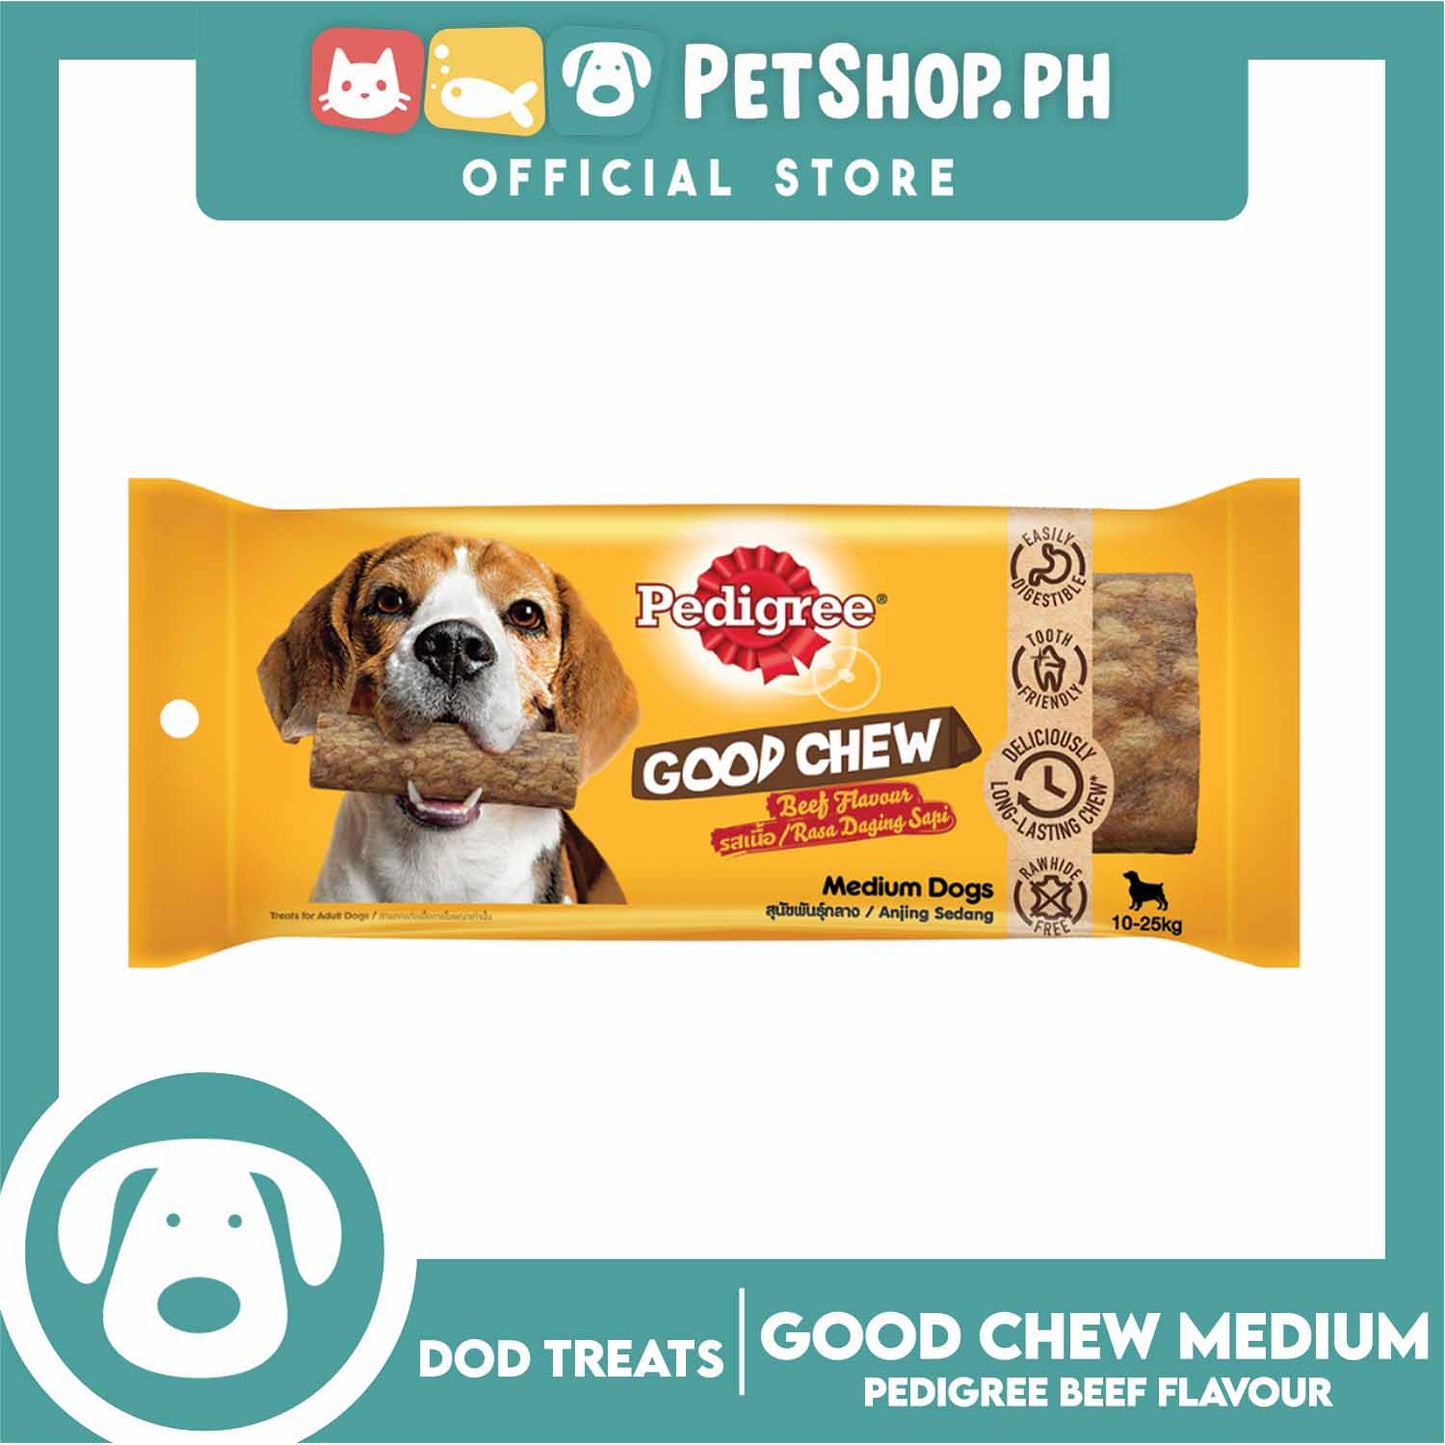 Pedigree Good Chew For Medium Dogs 10-25kg (Beef Flavor) Easily Digestible, Tooth Friendly, Deliciously Long Lasting Chew, Rawhide Free, Dog Chews, Dental Treats